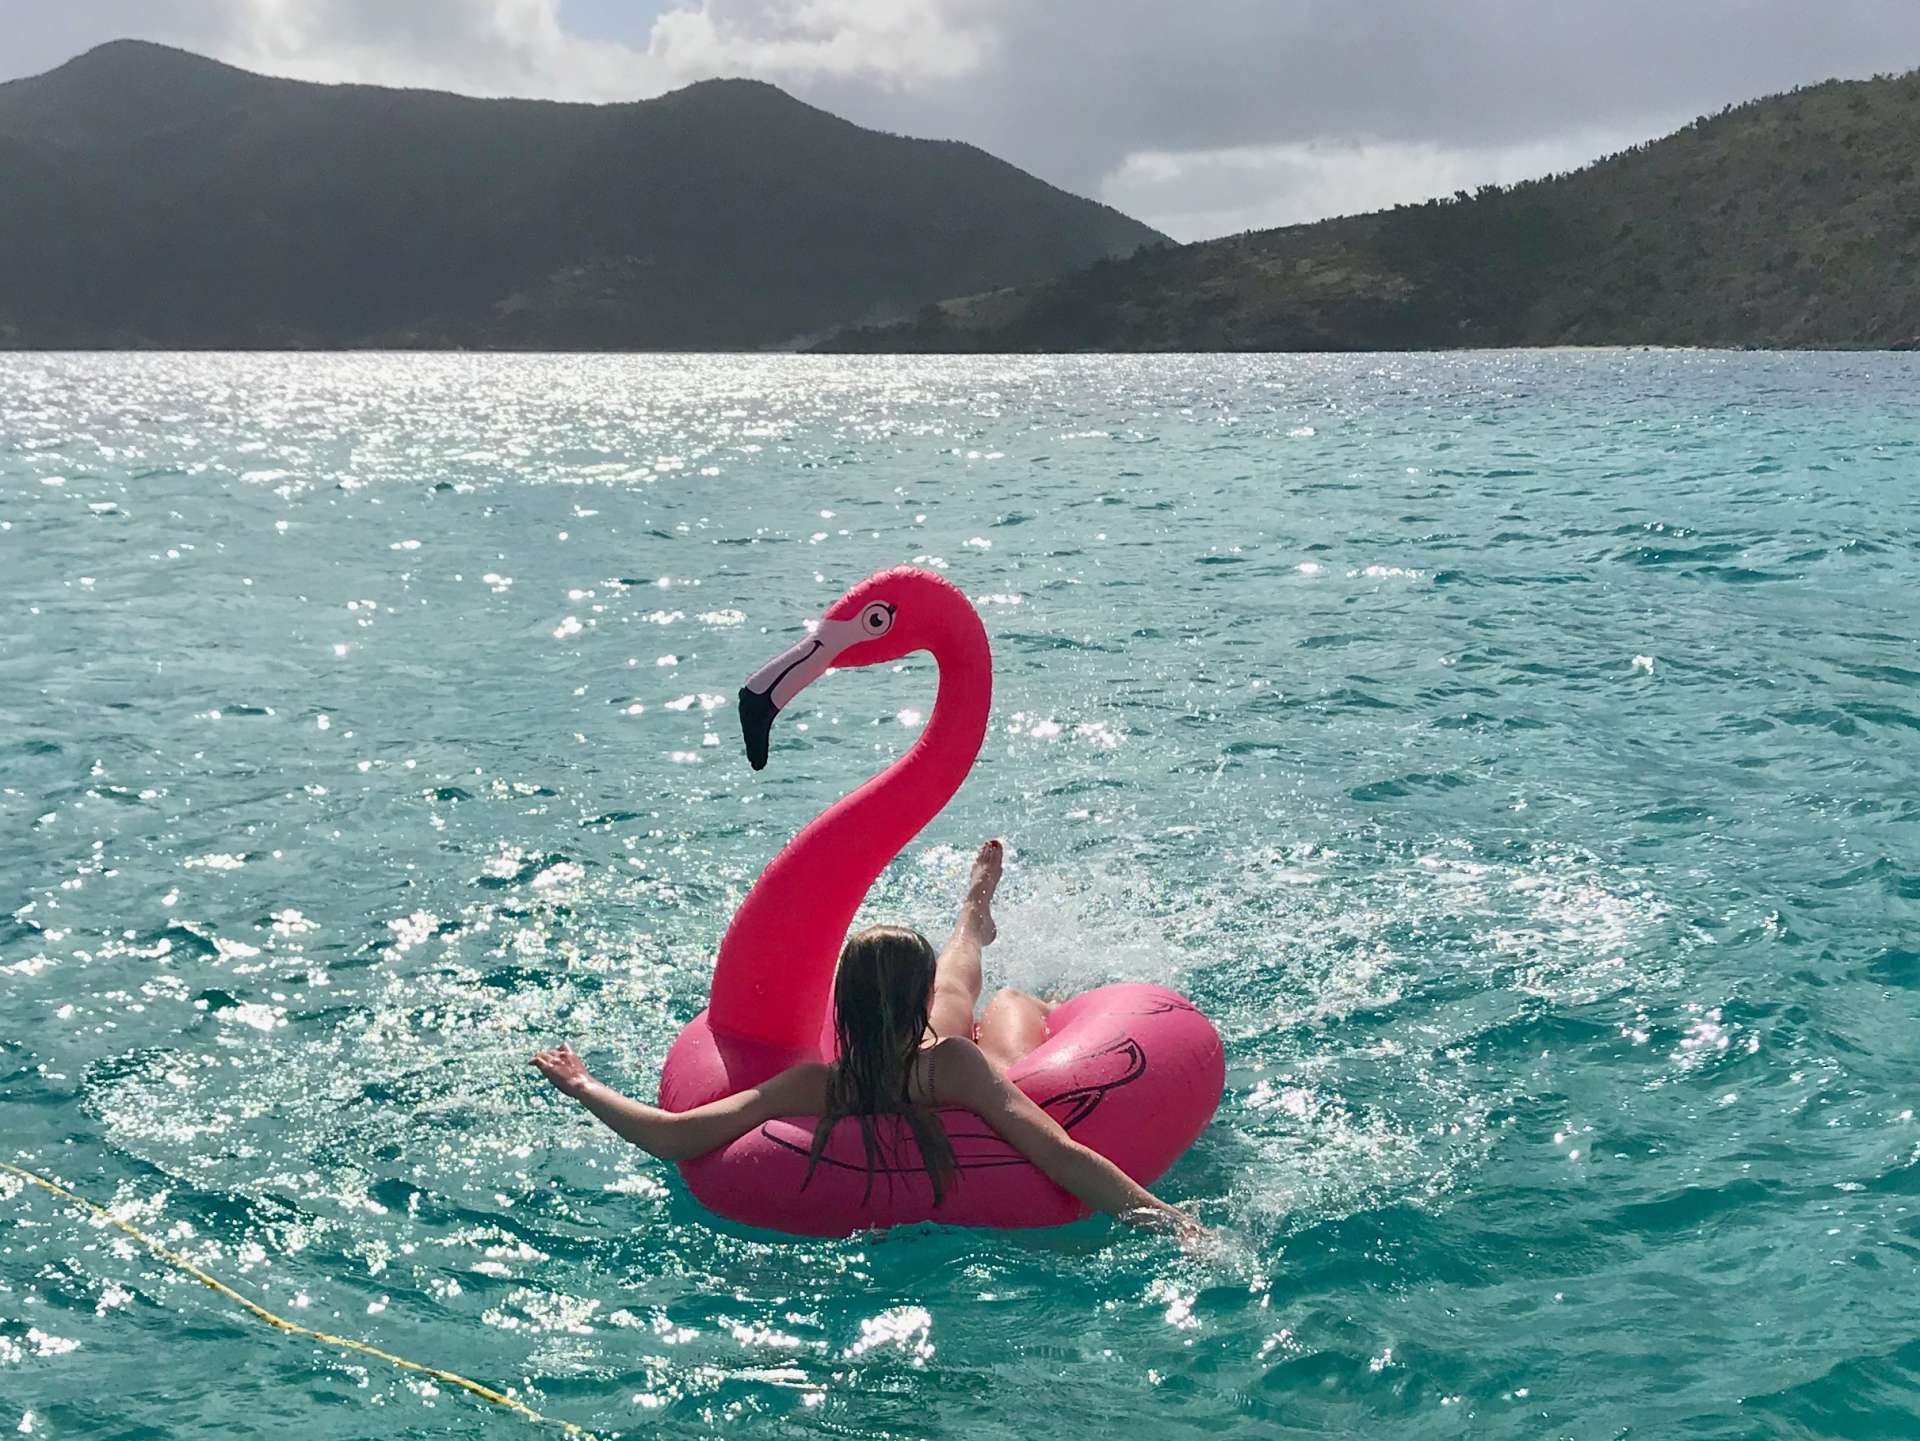 Kick back and enjoy the view on our inflatable flamingo